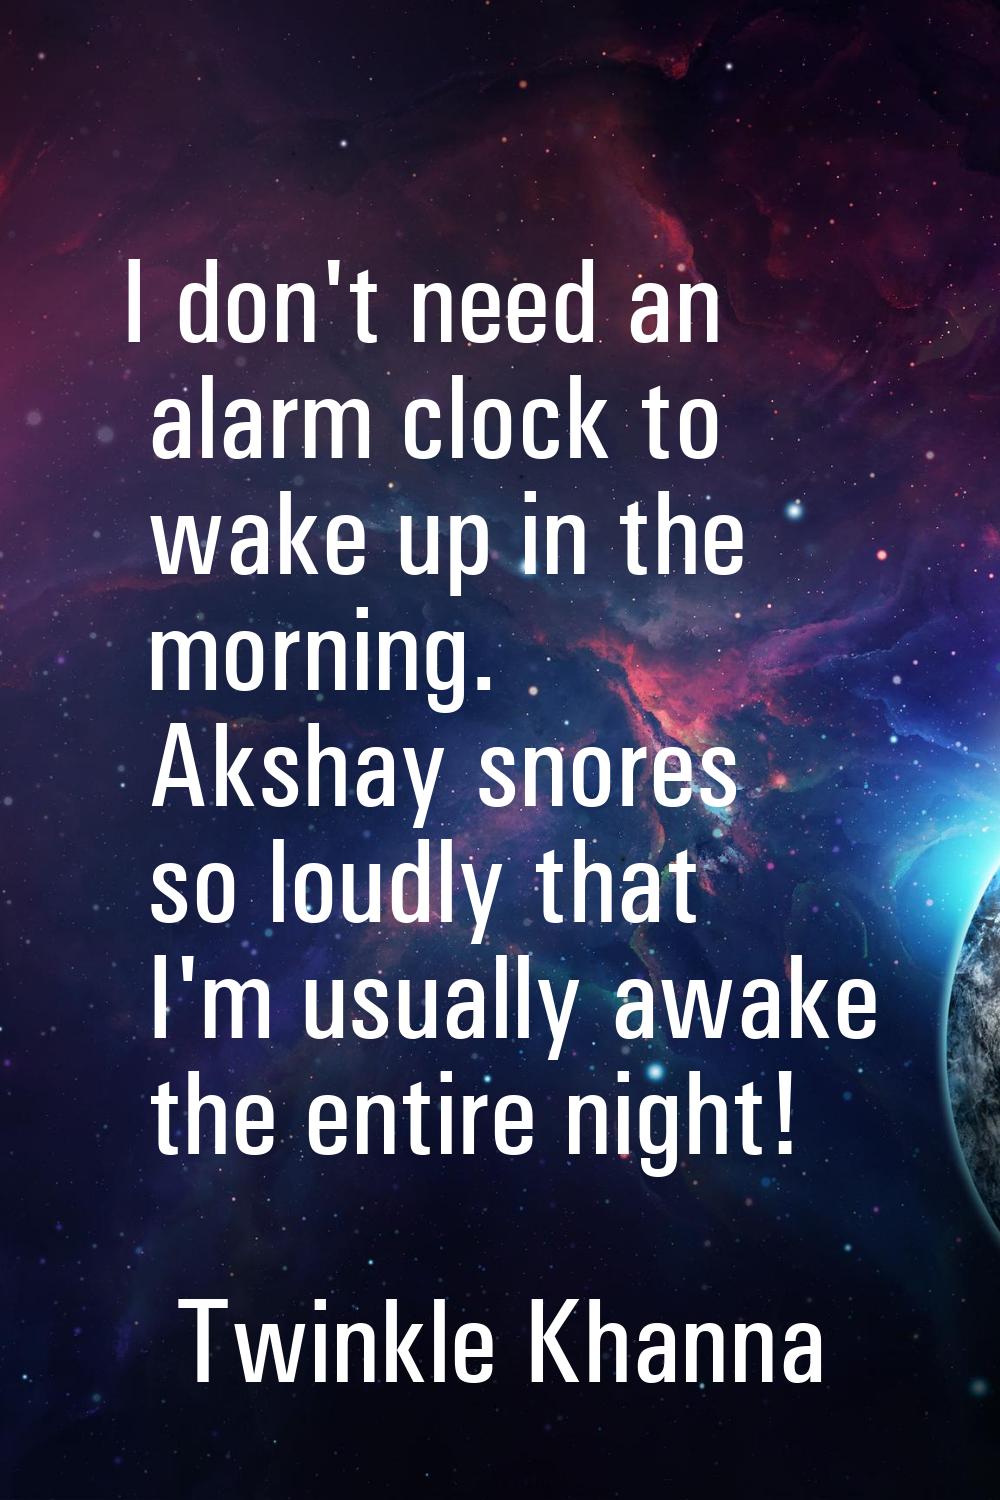 I don't need an alarm clock to wake up in the morning. Akshay snores so loudly that I'm usually awa